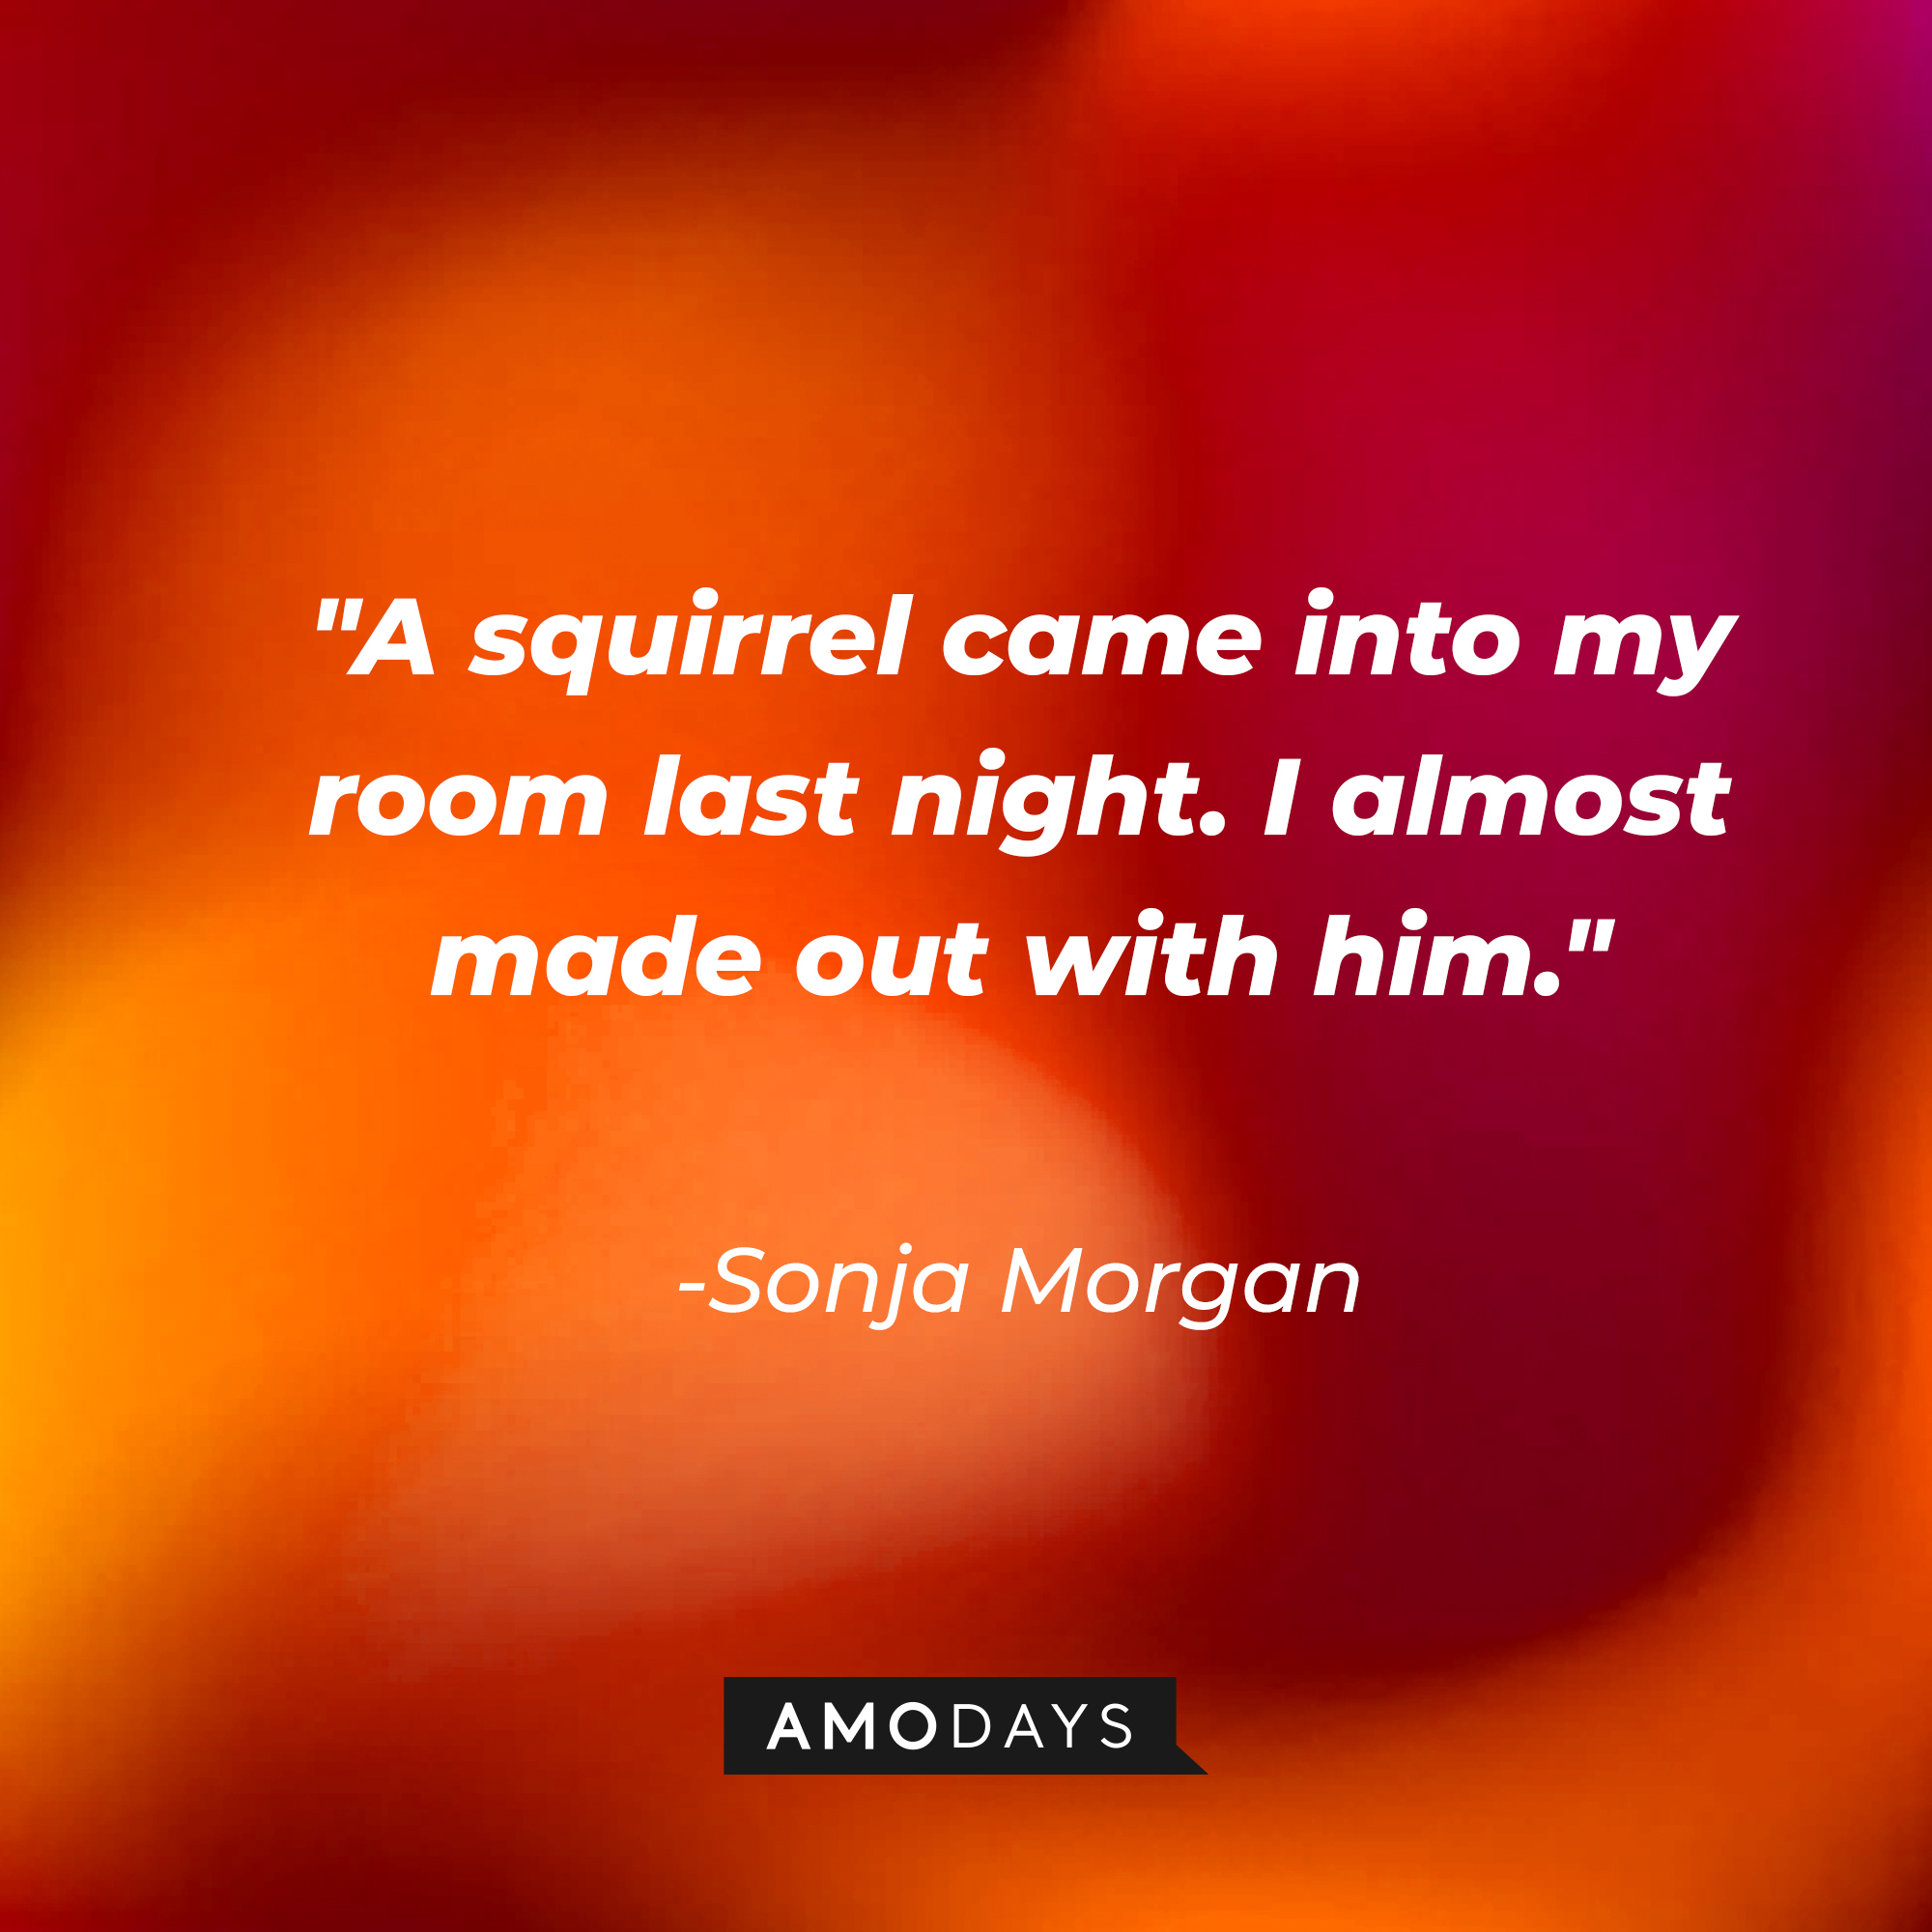 Sonja Morgan's quote: "A squirrel came into my room last night. I almost made out with him." | Source: Amodays